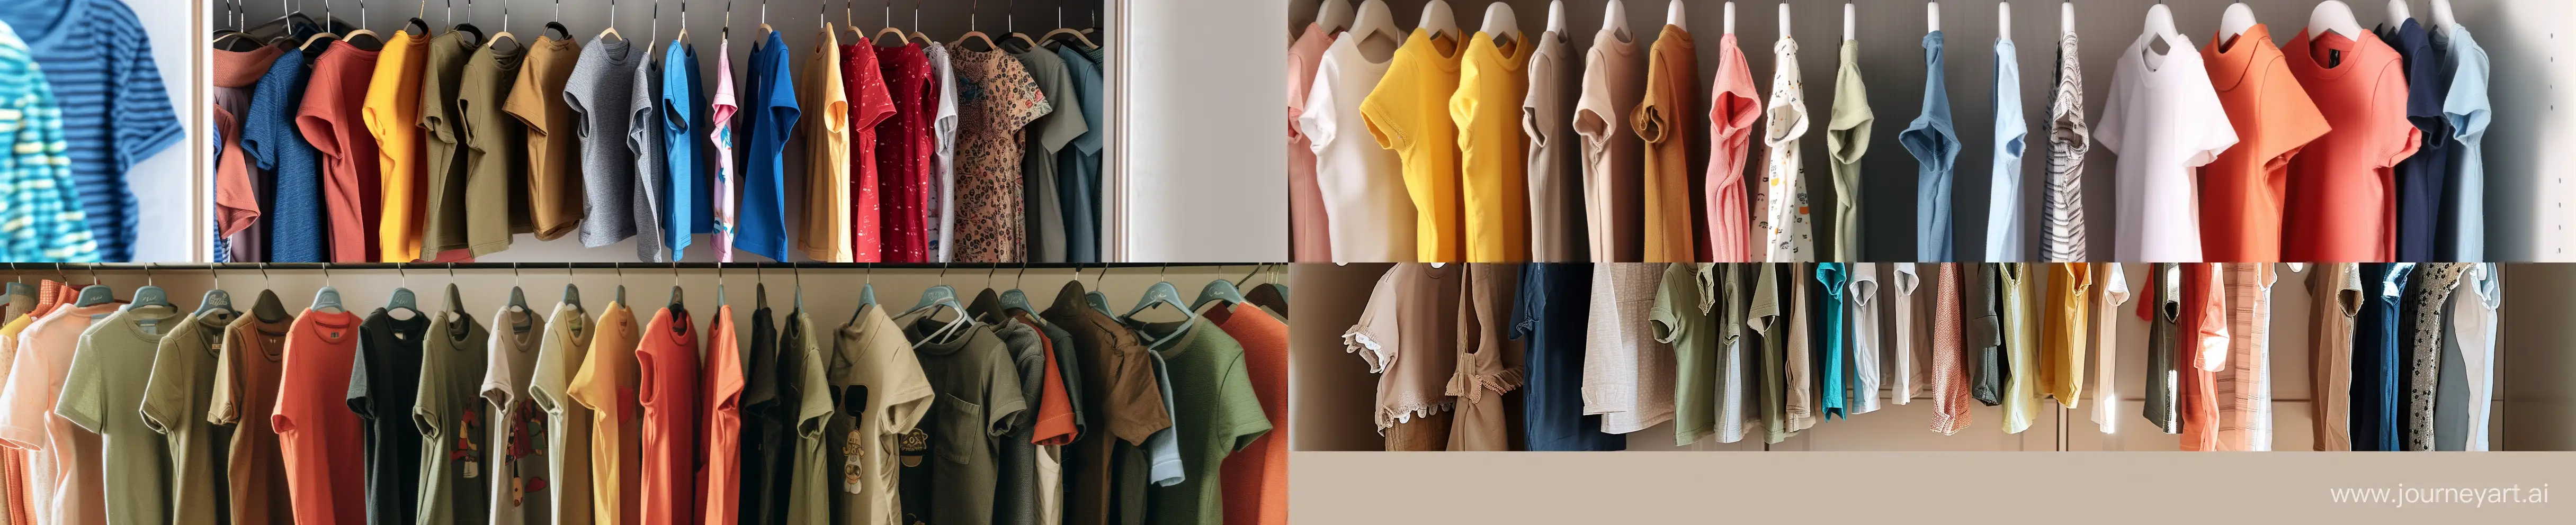 children's clothes are hung on hangers in the closet, only the inside of the closet can be seen in full width with clothes hanging, short-sleeved t-shirts and pants are also hung, and girls' and boys' clothes, earth-colored, lighter pieces on the left side, and already colorful, --aspect 44:9